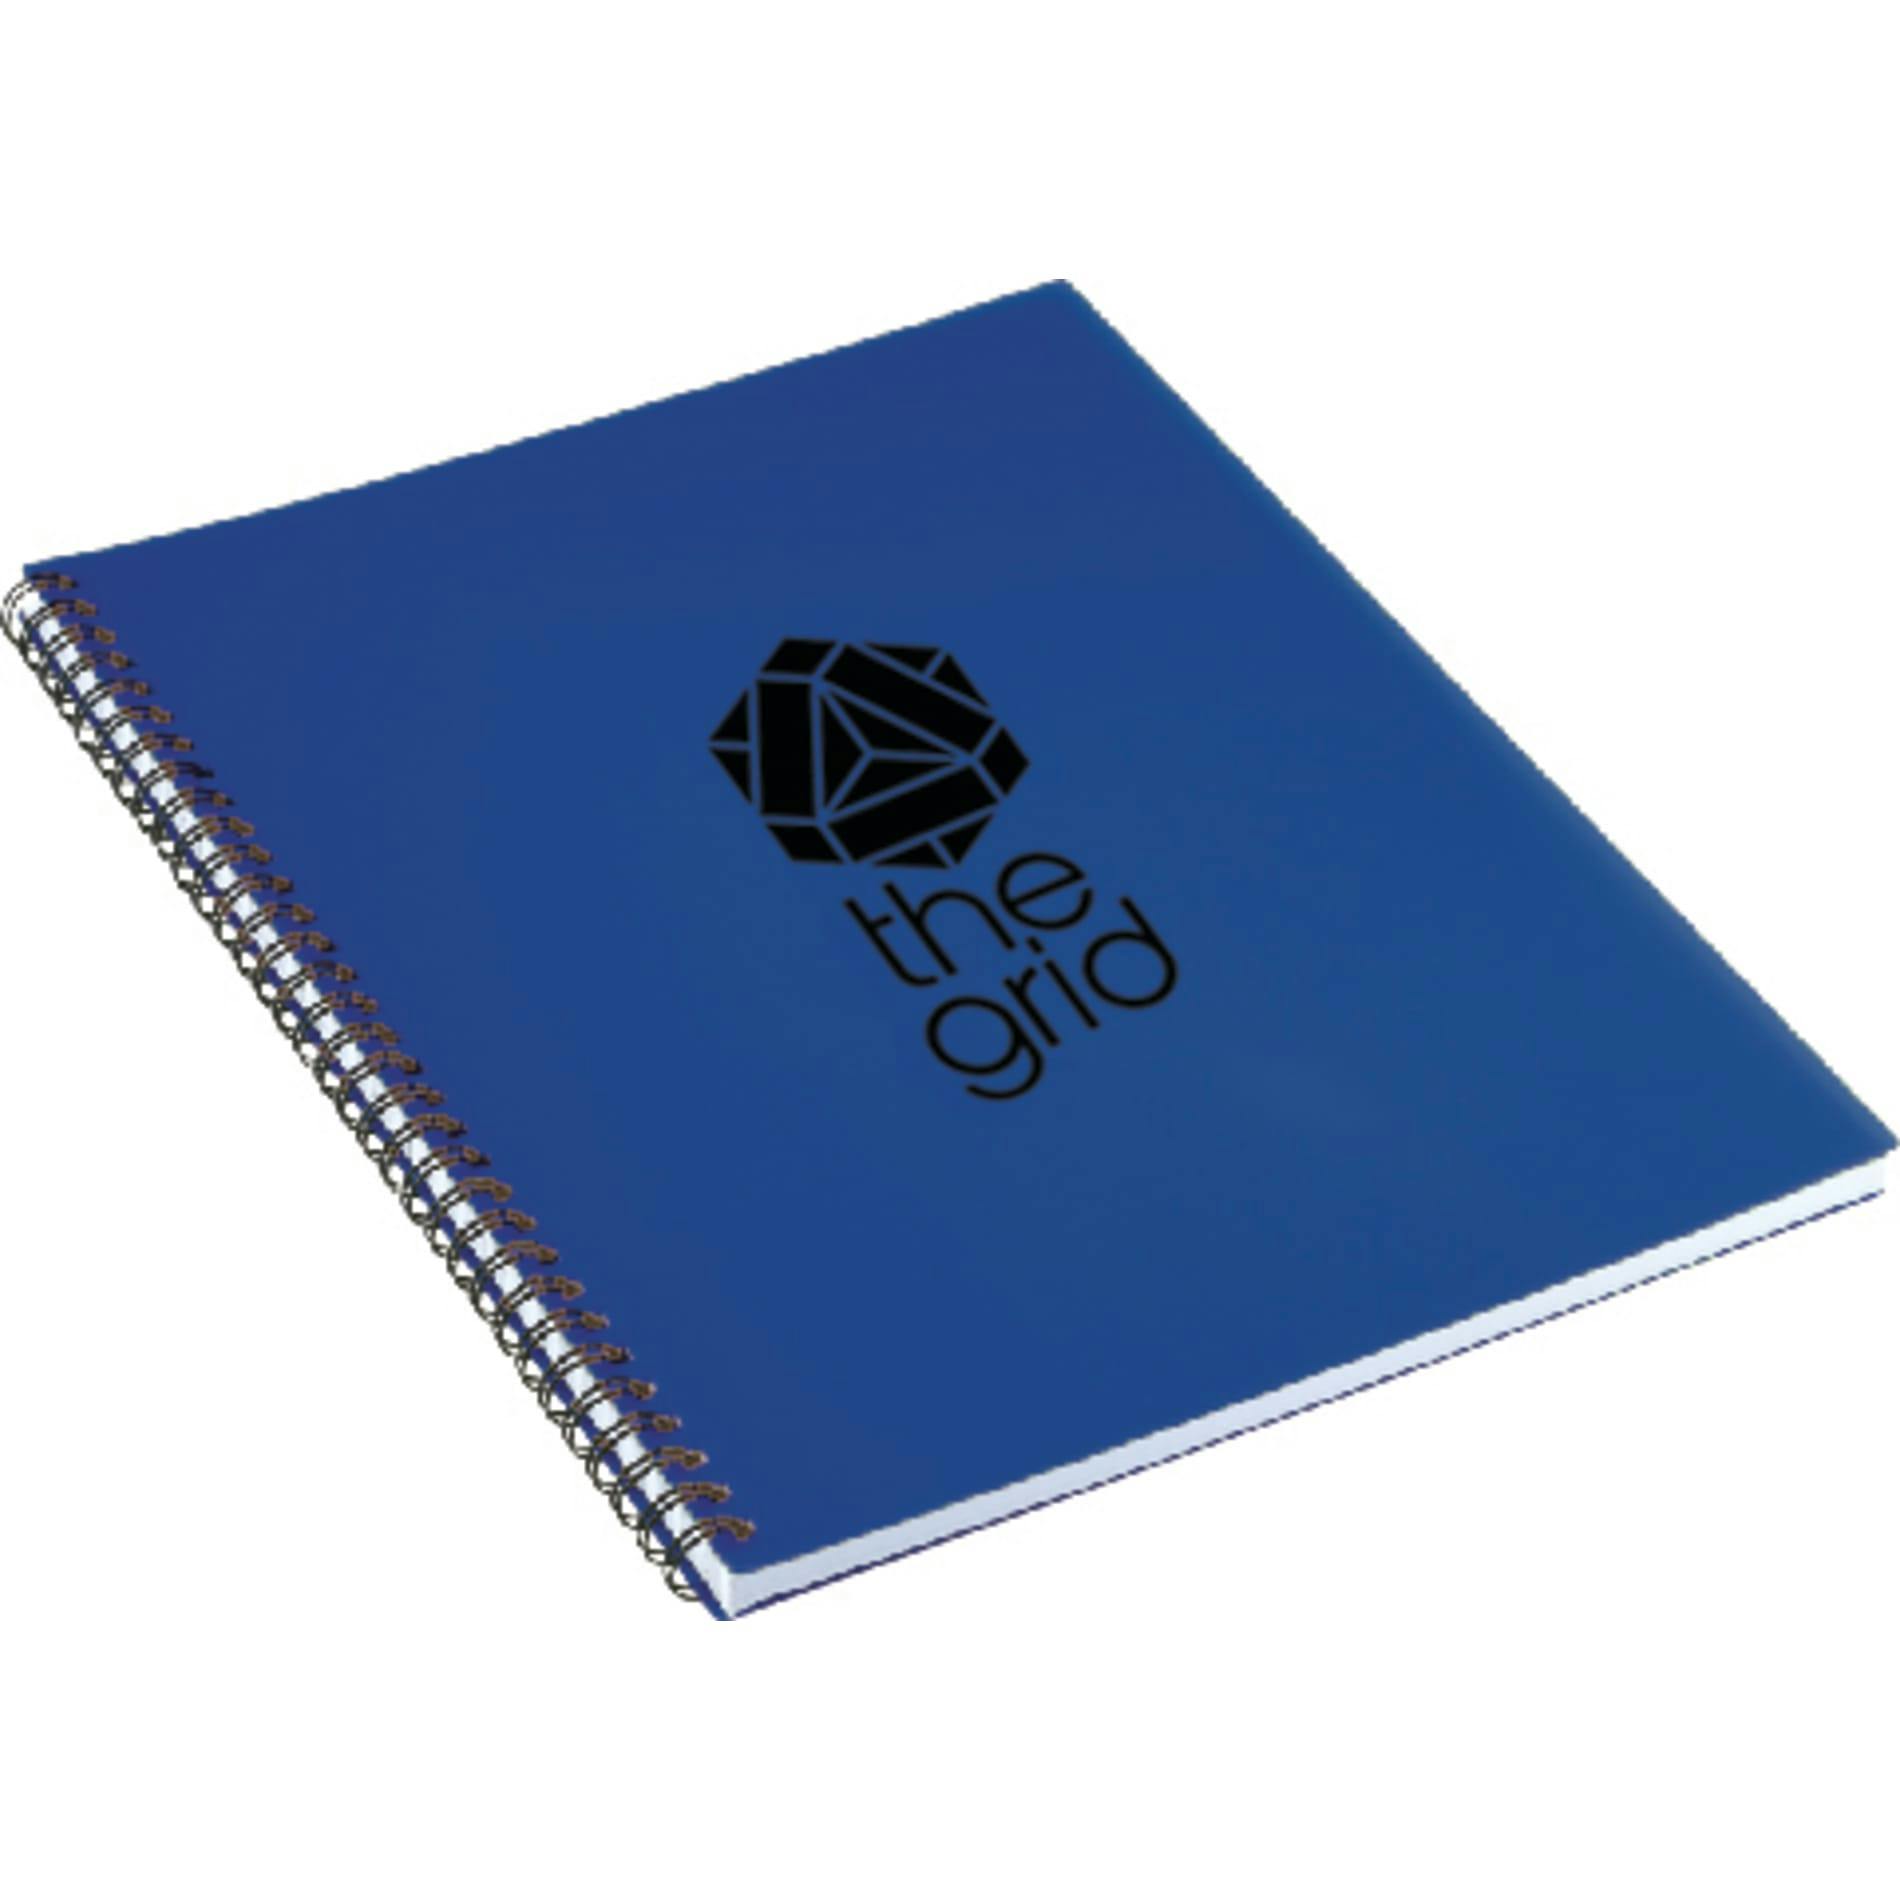 8.5" x 11" Lg Business Spiral Notebook - additional Image 1